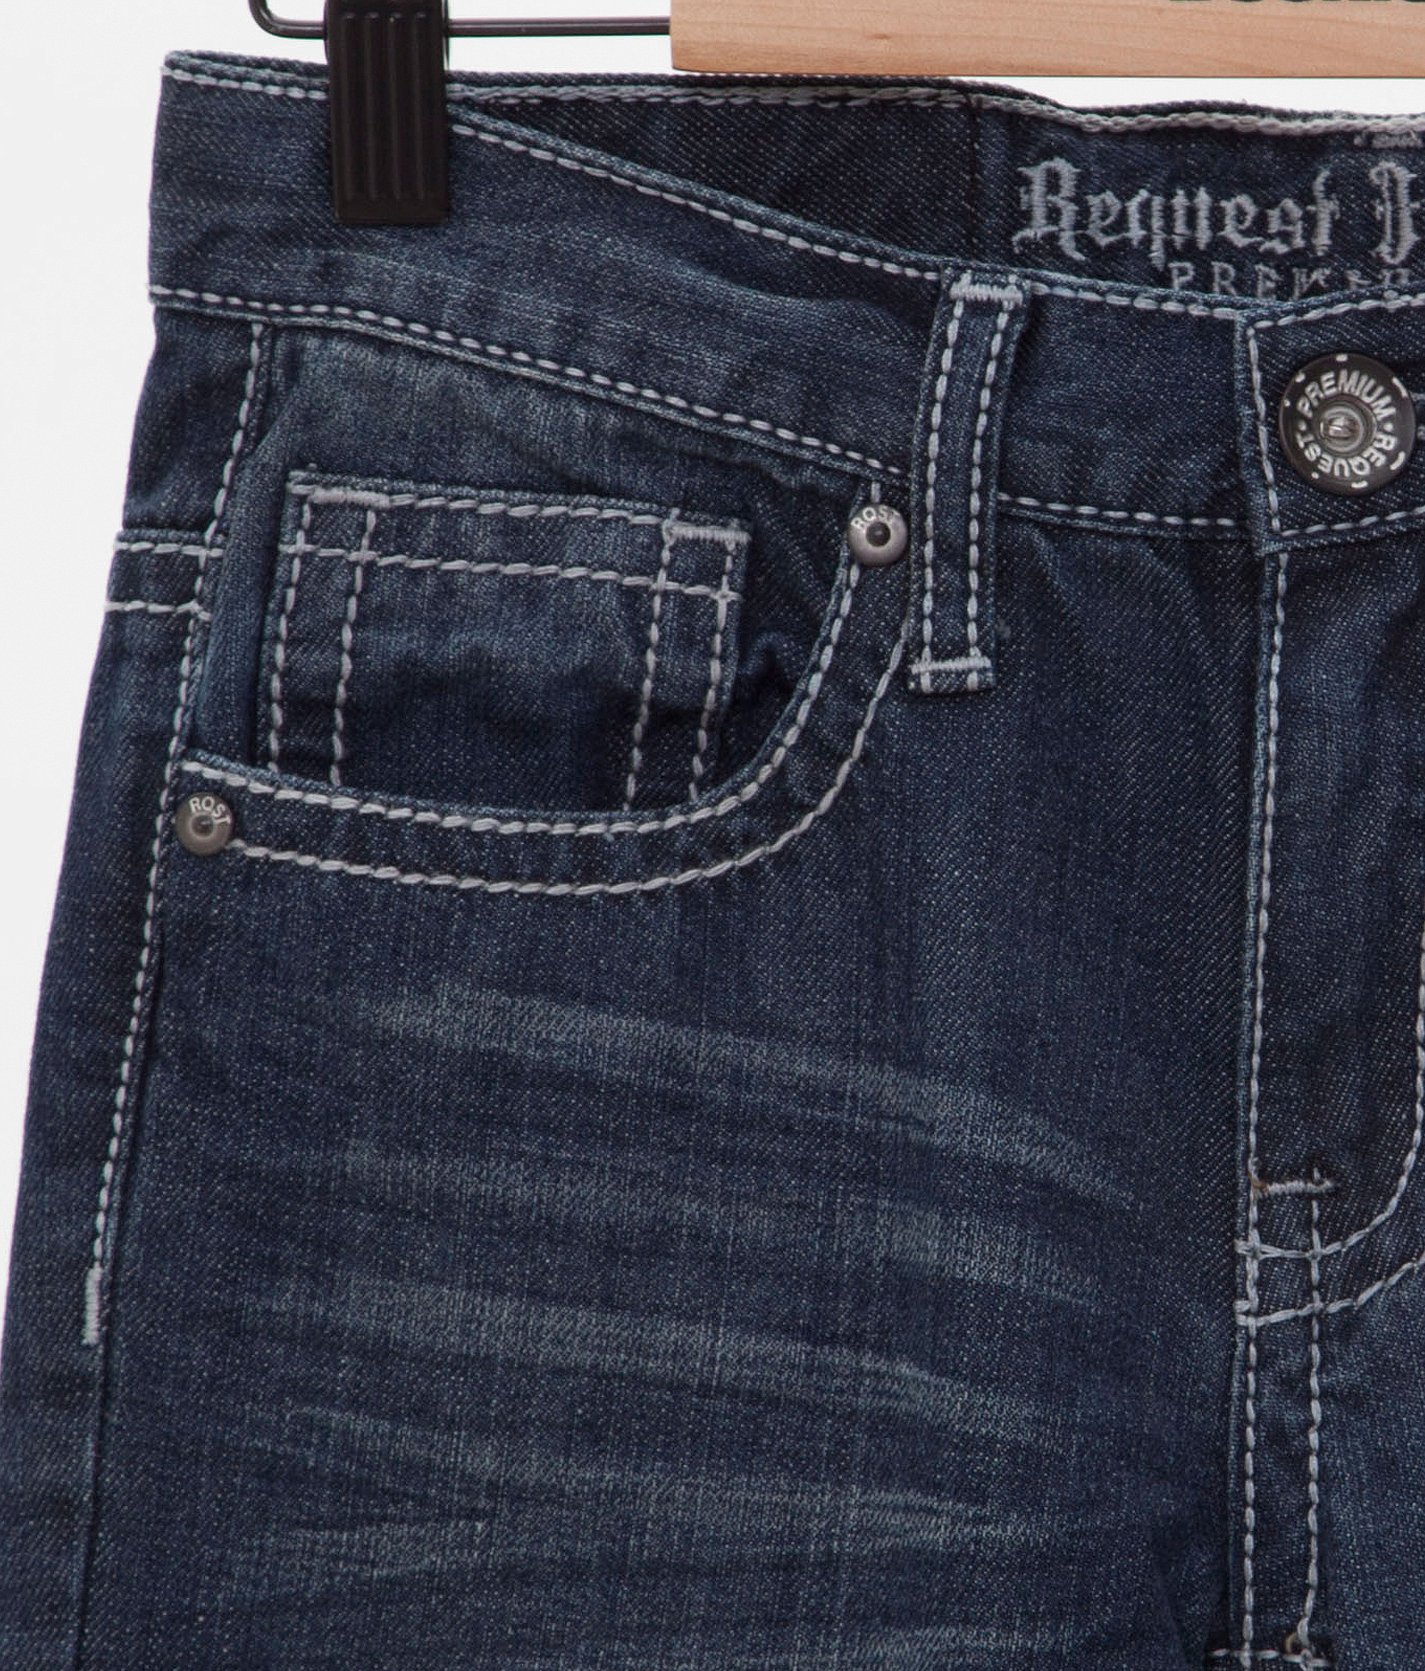 request jeans boys